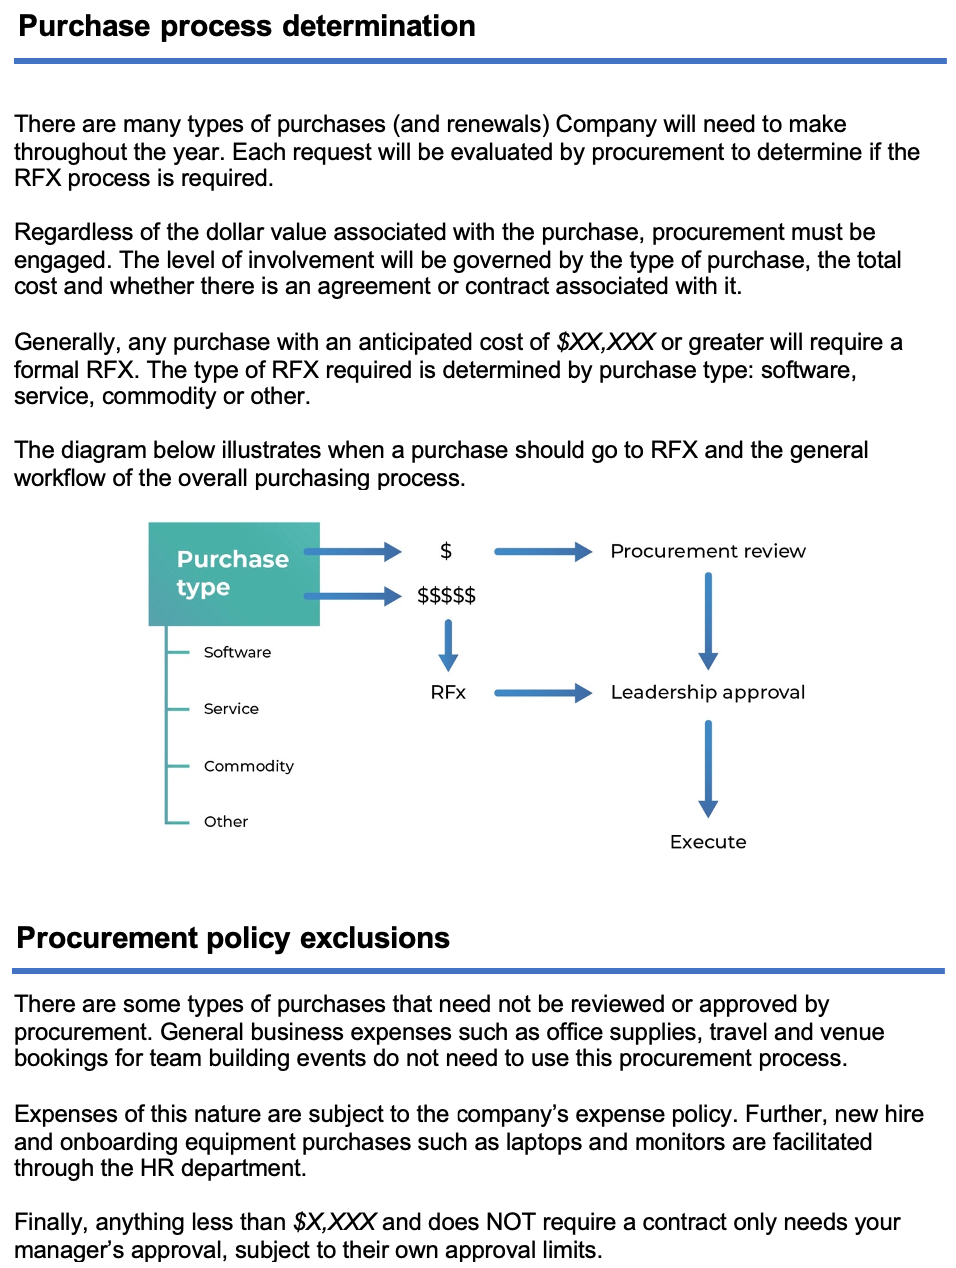 How to write a procurement policy that empowers and protects RFP360